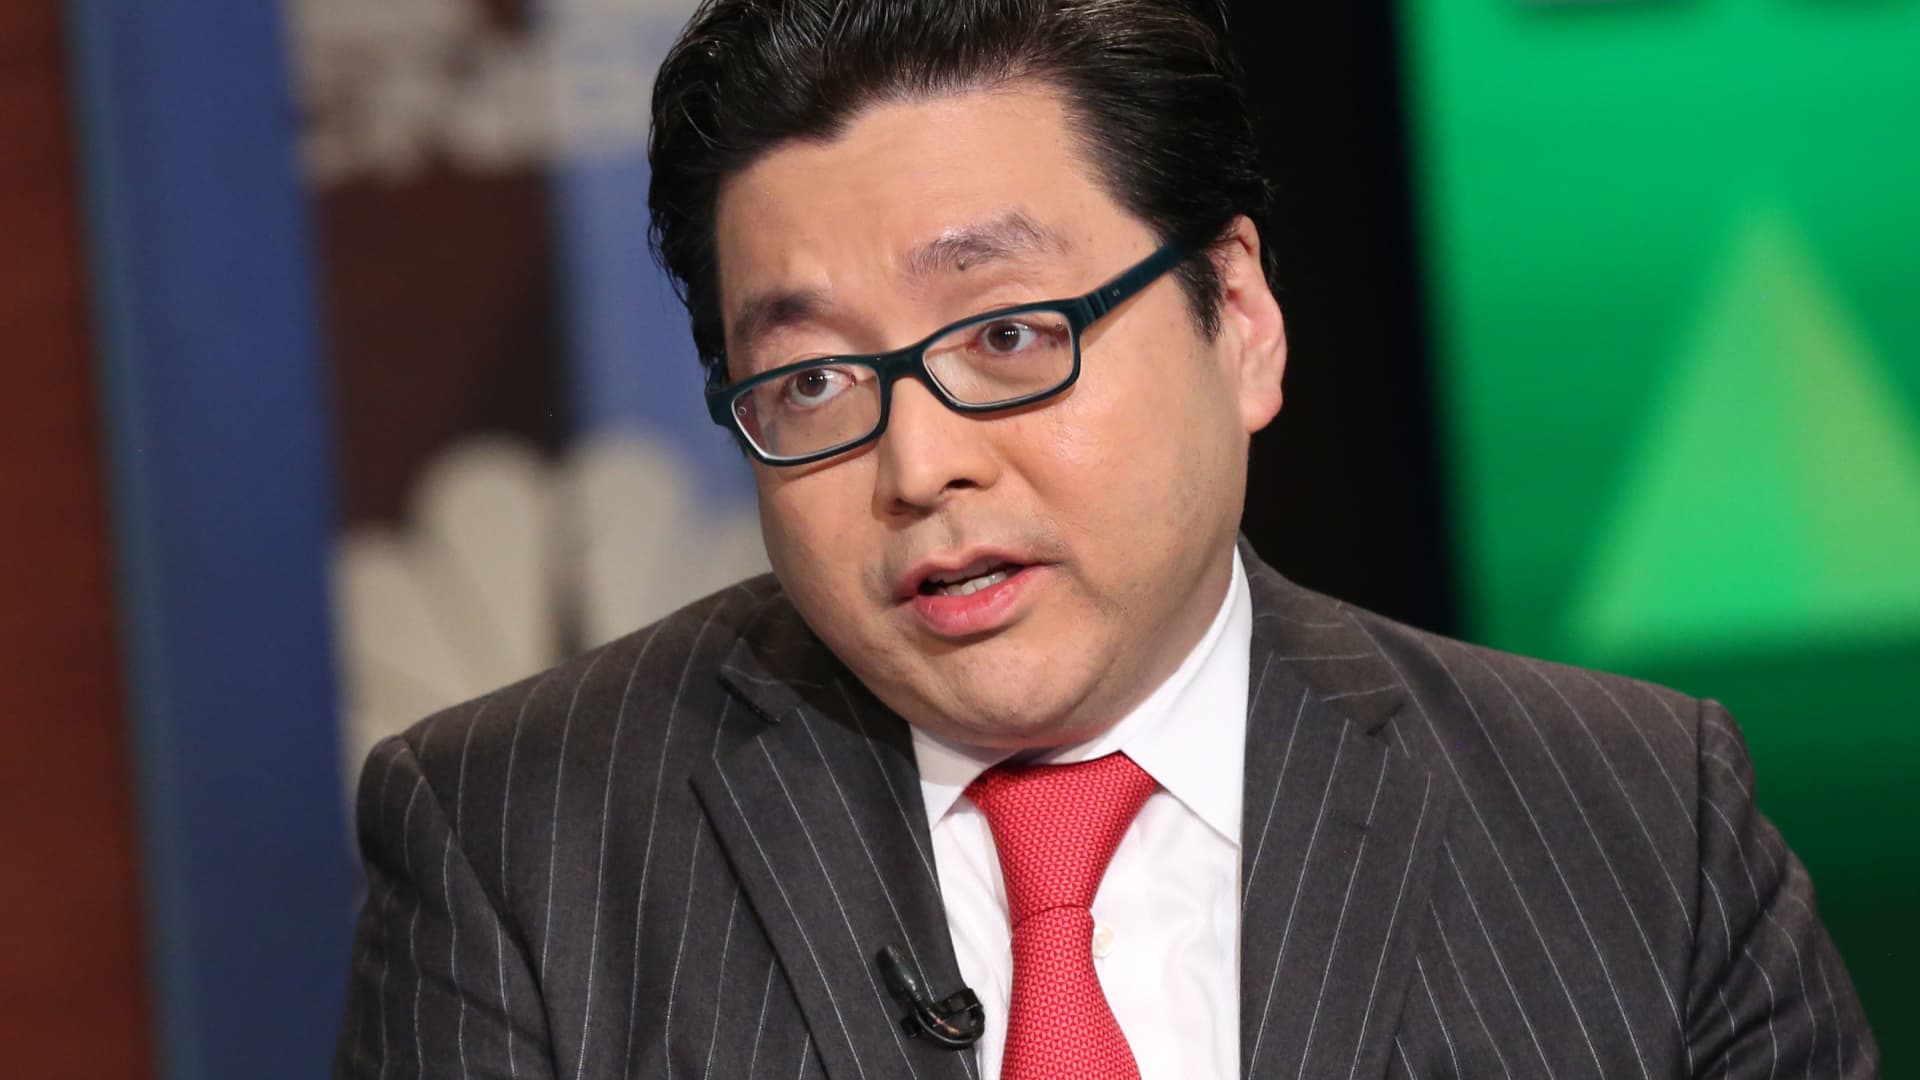 Energy stocks could double next year even in a flat market, according to Fundstrat's Tom Lee